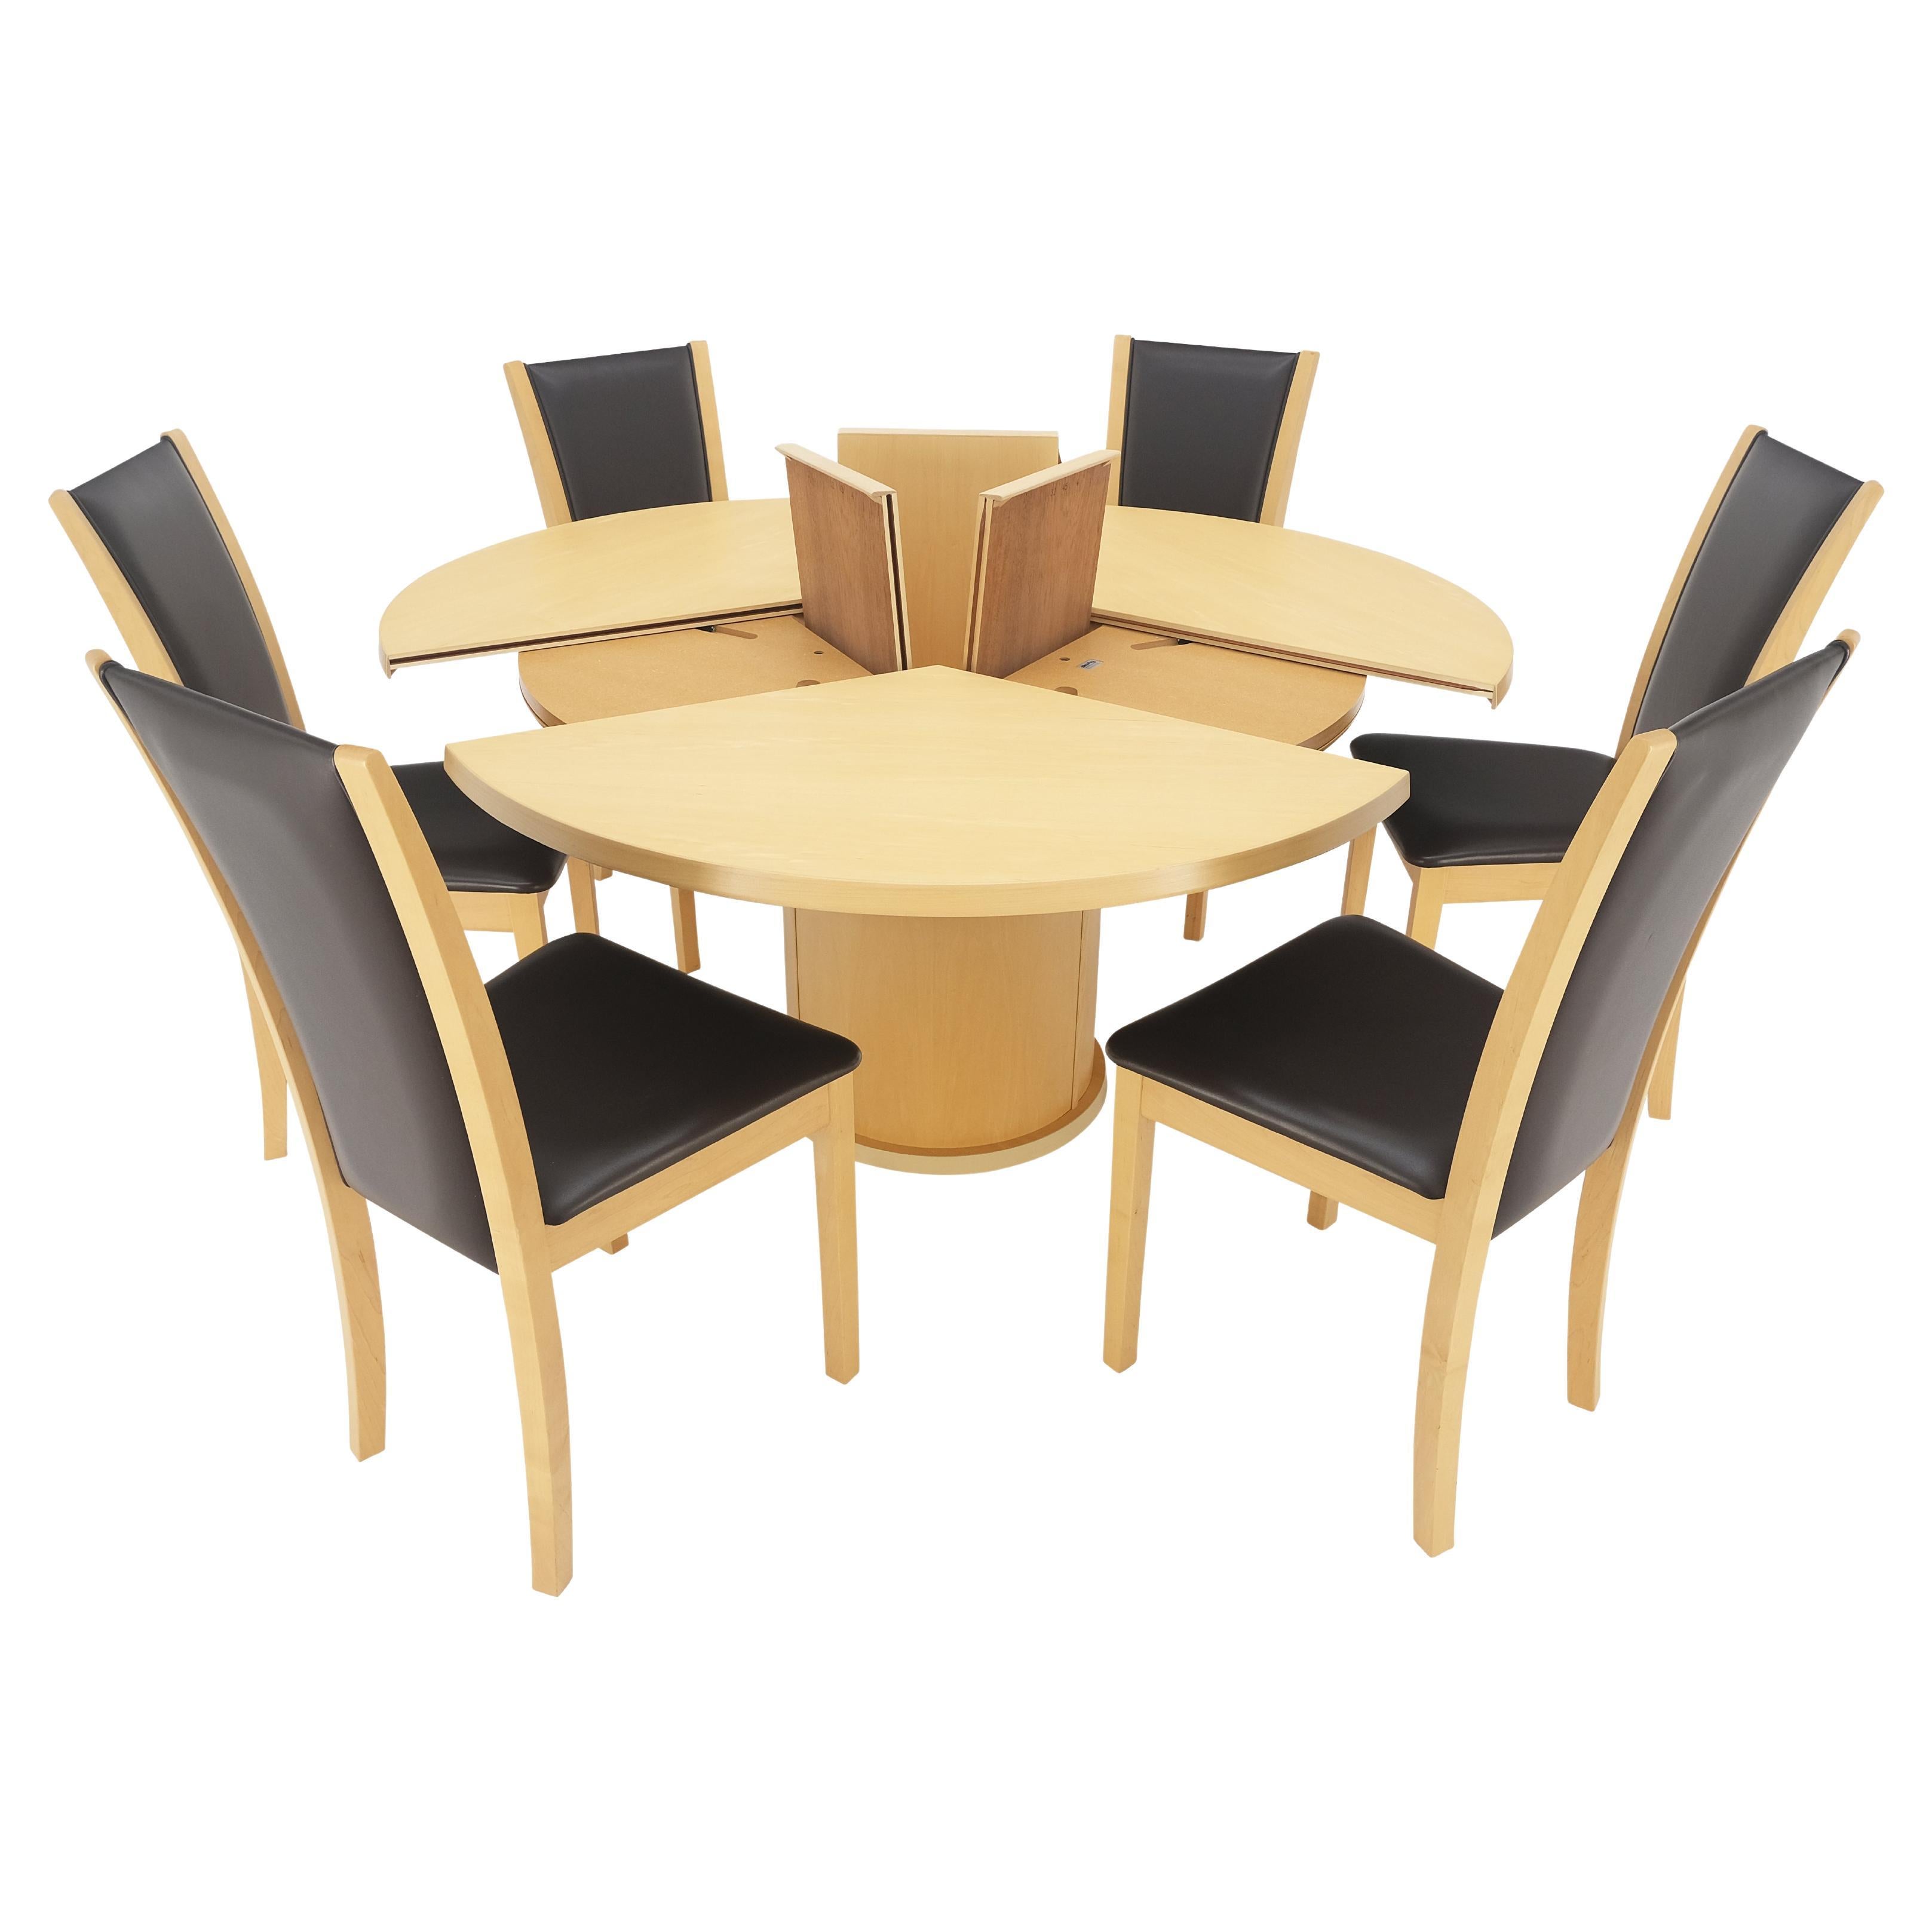 Rare Blond Maple Round Expandable Dining Table 6 Chairs Set Set Denmark MINT! 